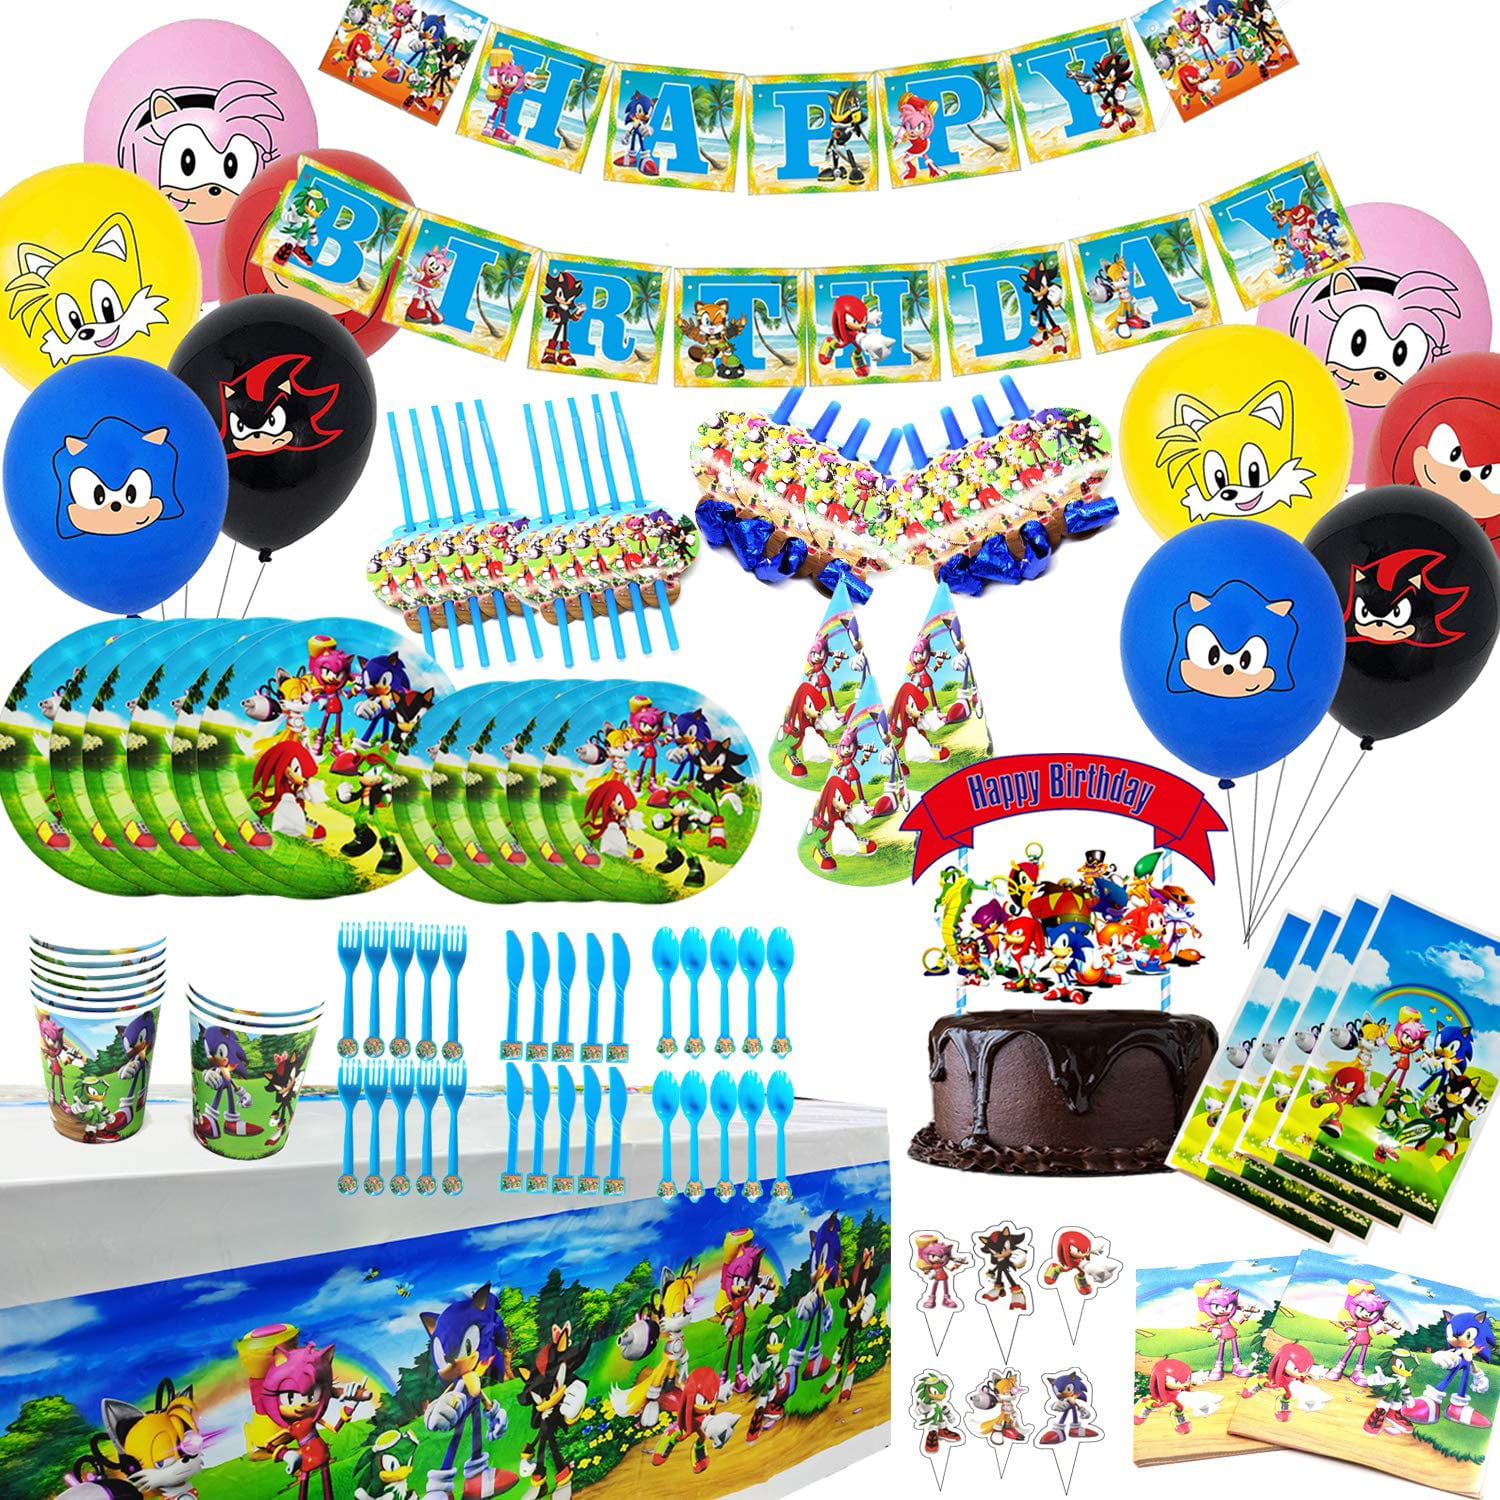 16 pcs Sonic Forks 32 pcs 9 69 Sonic the Hedgehog Party Supplies 20 pcs Napkins and 1 pcs Tablecover 7 Inch Party paper Plates Party Kit for Kids Birthday Sonic the Hedgehog Theme Baby Shower 16 Guests Birthday Party Dessert Set 